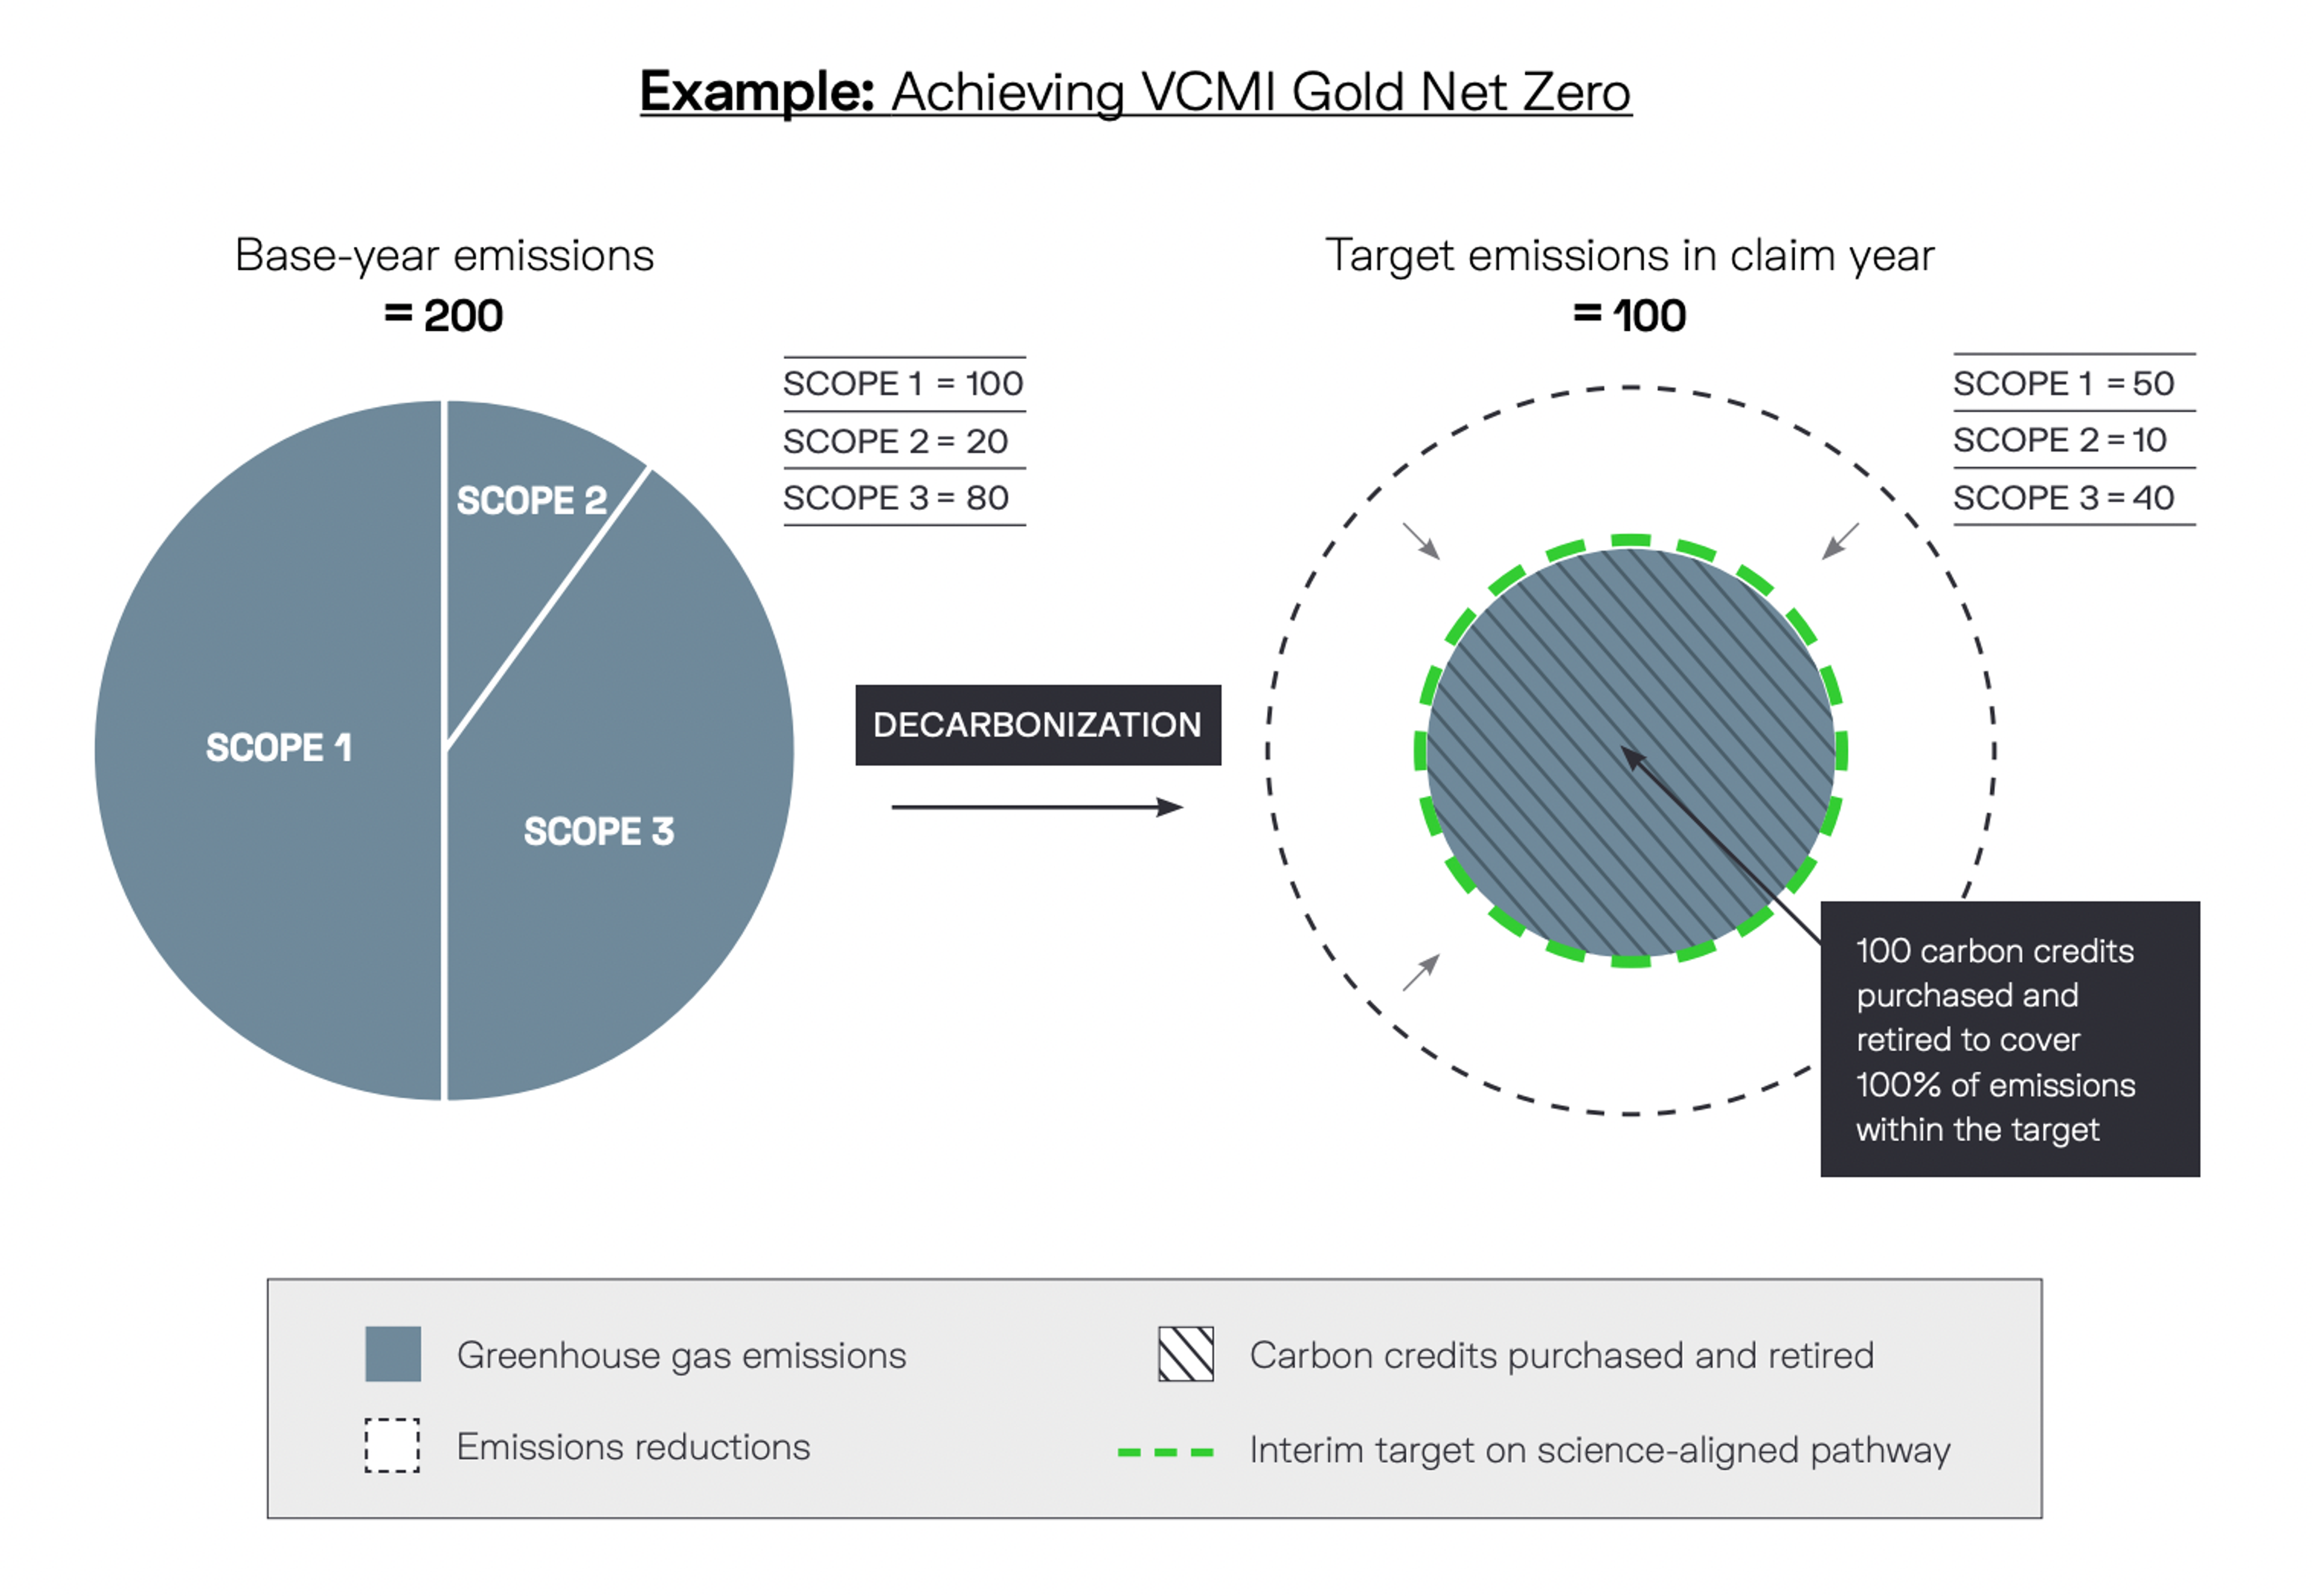 VCMI Preliminary Claims Code of Practice Gold Net Zero